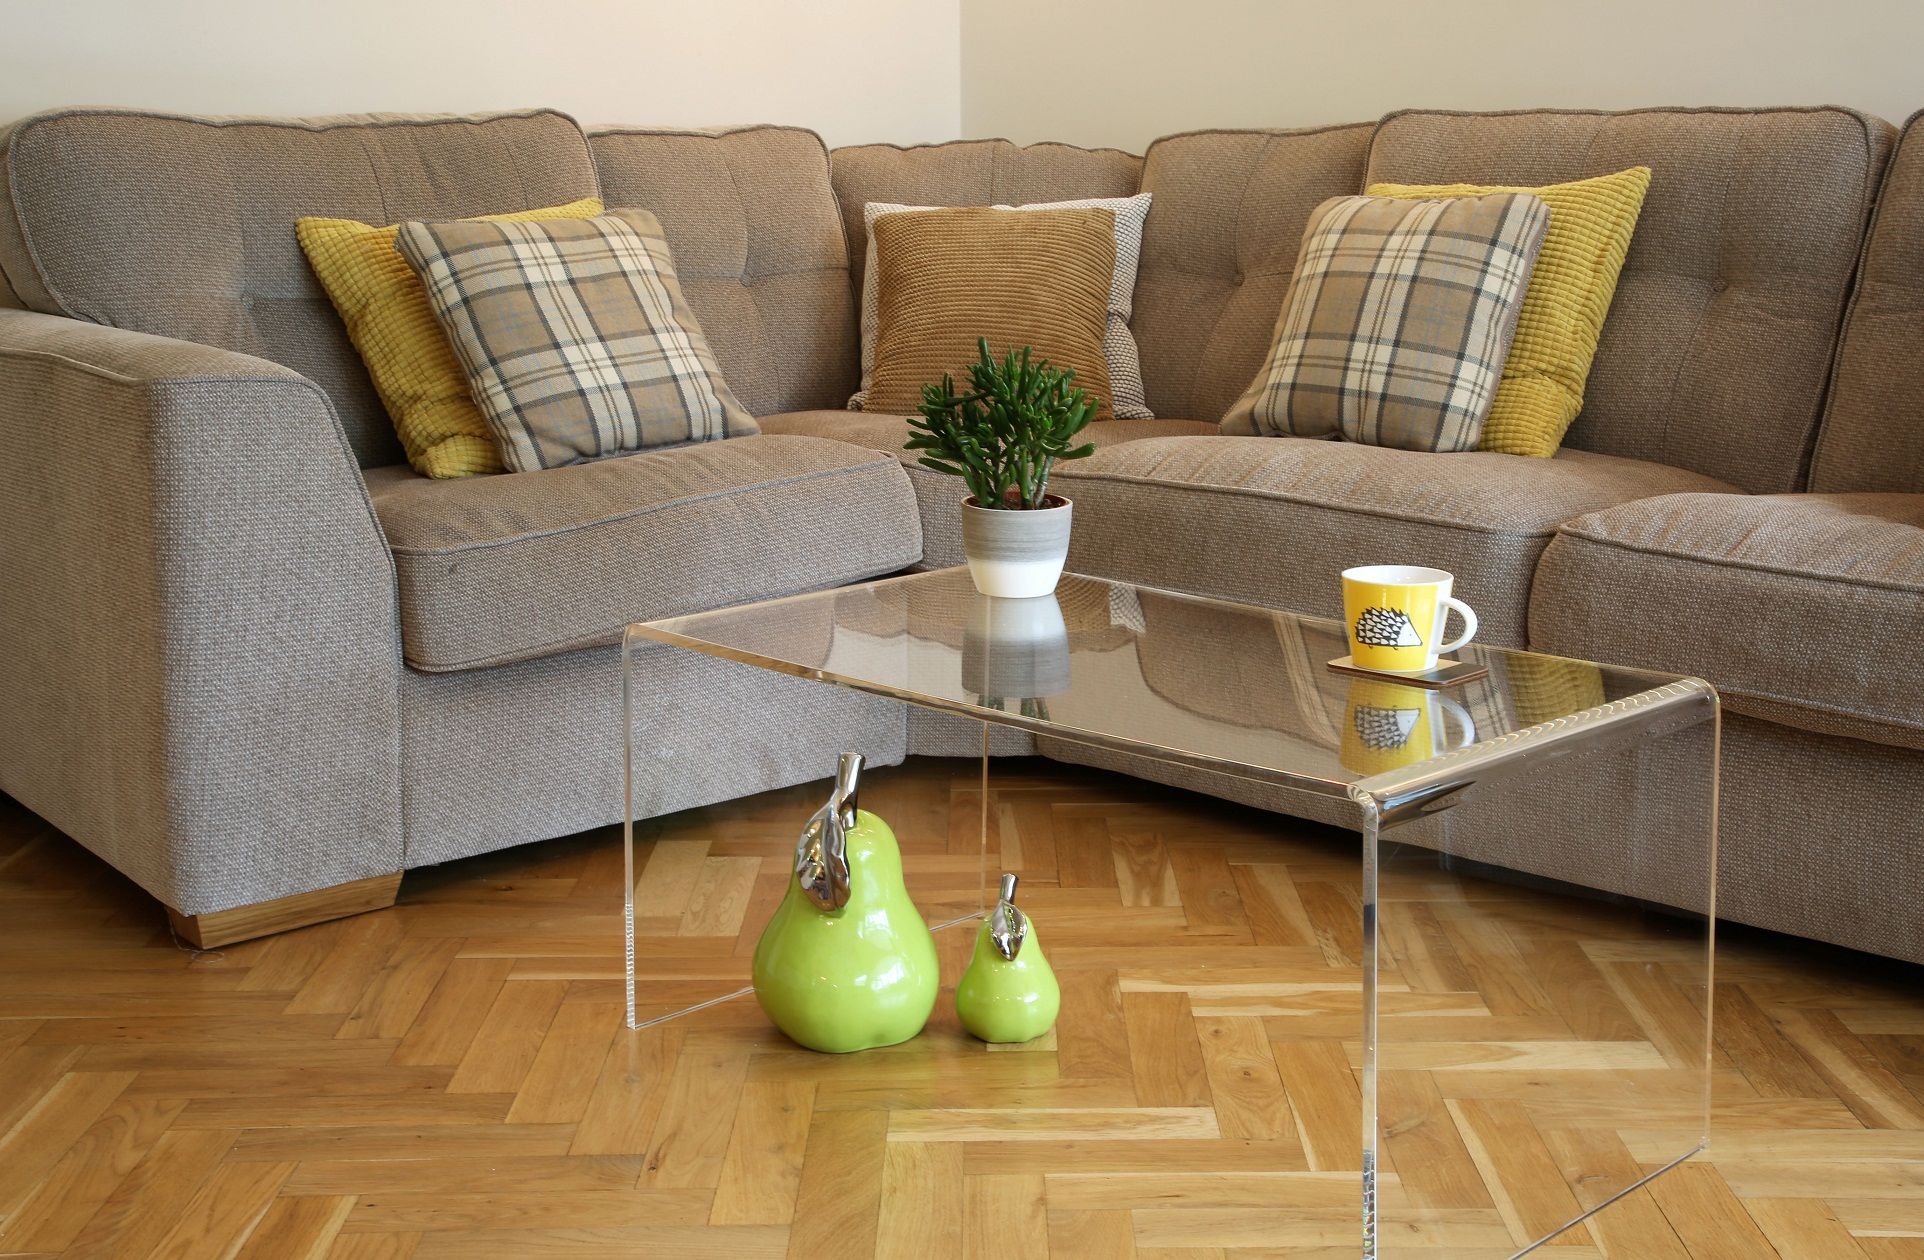 Acrylic Coffee Tables | Latest Designs | Free Delivery With Acrylic Coffee Tables (View 3 of 15)